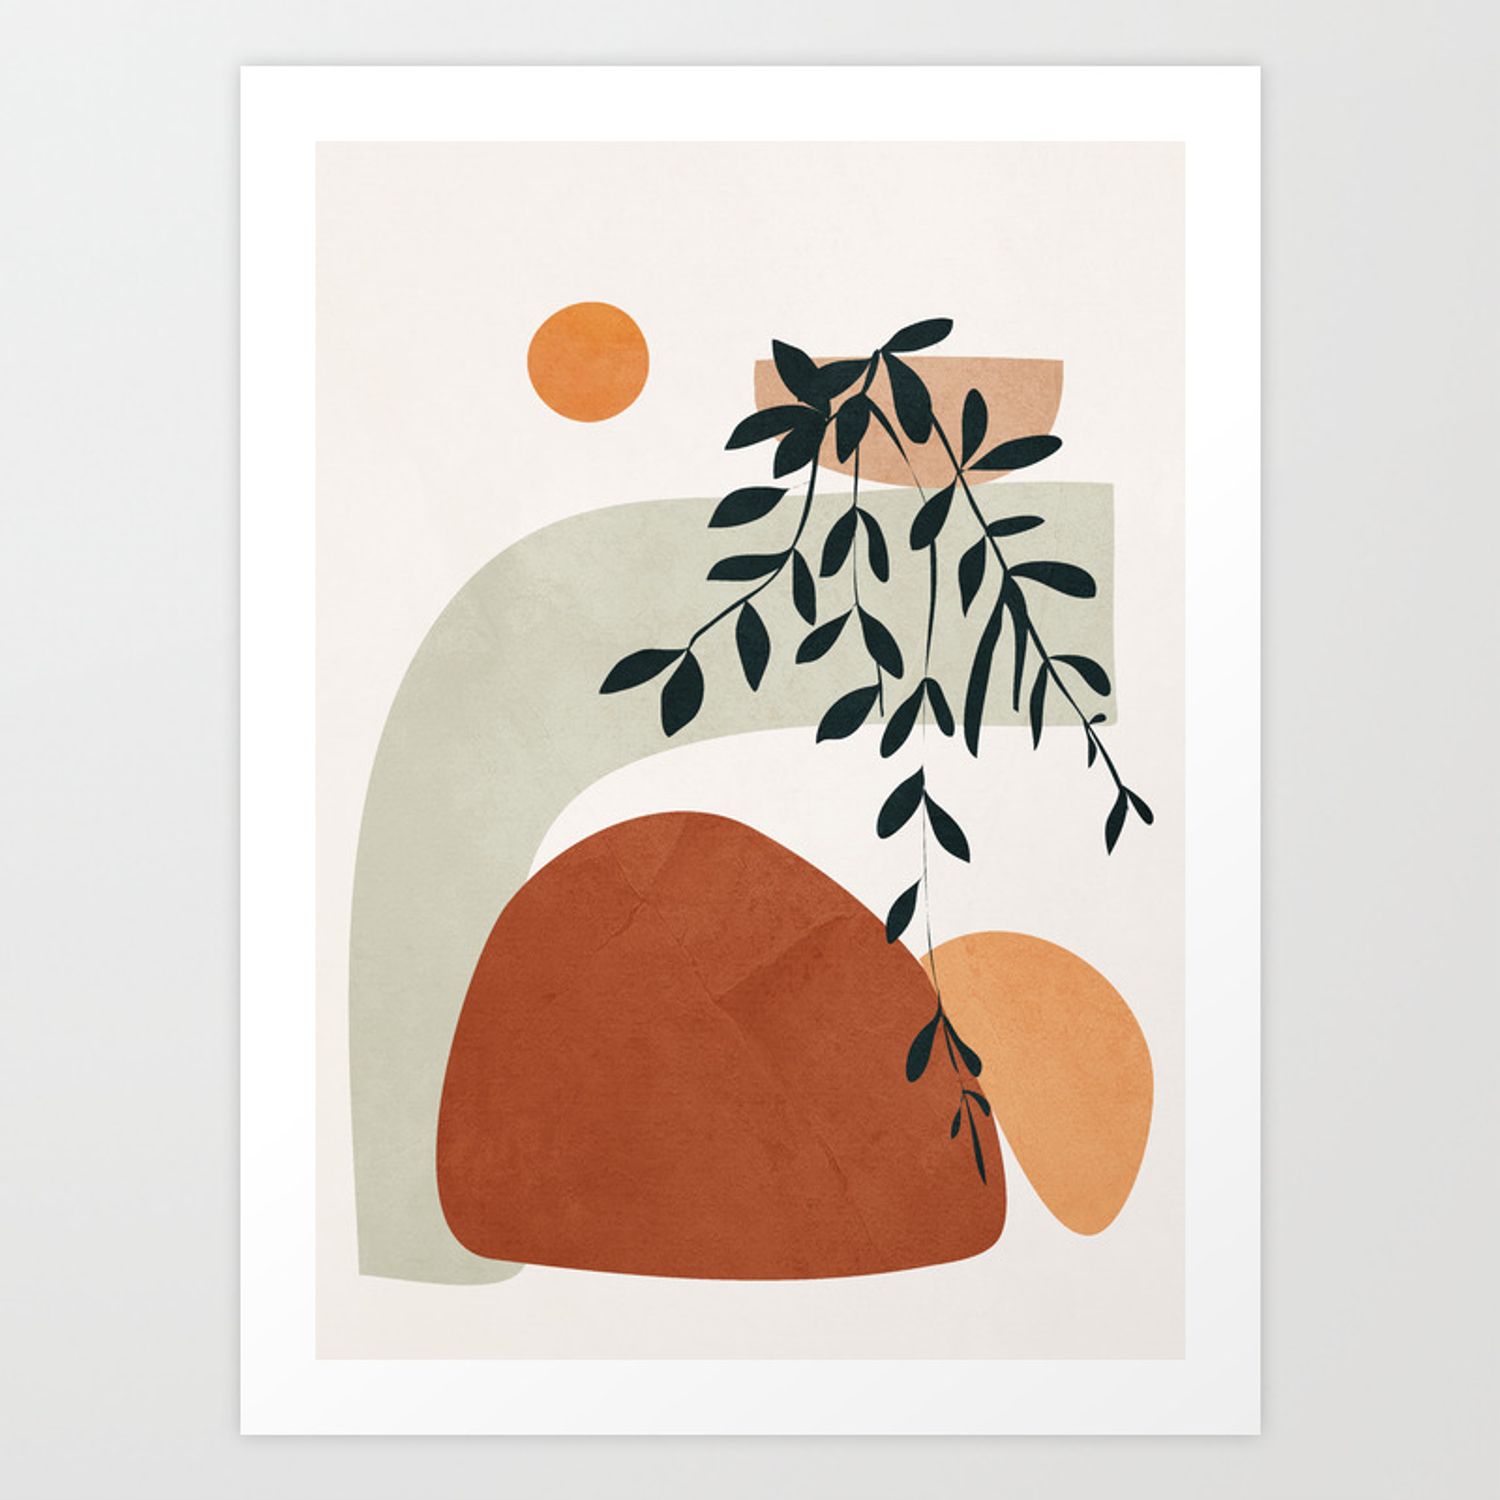 Soft Shapes I Art Printcity Art | Society6 Within Newest Soft Shapes Wall Art (View 1 of 20)